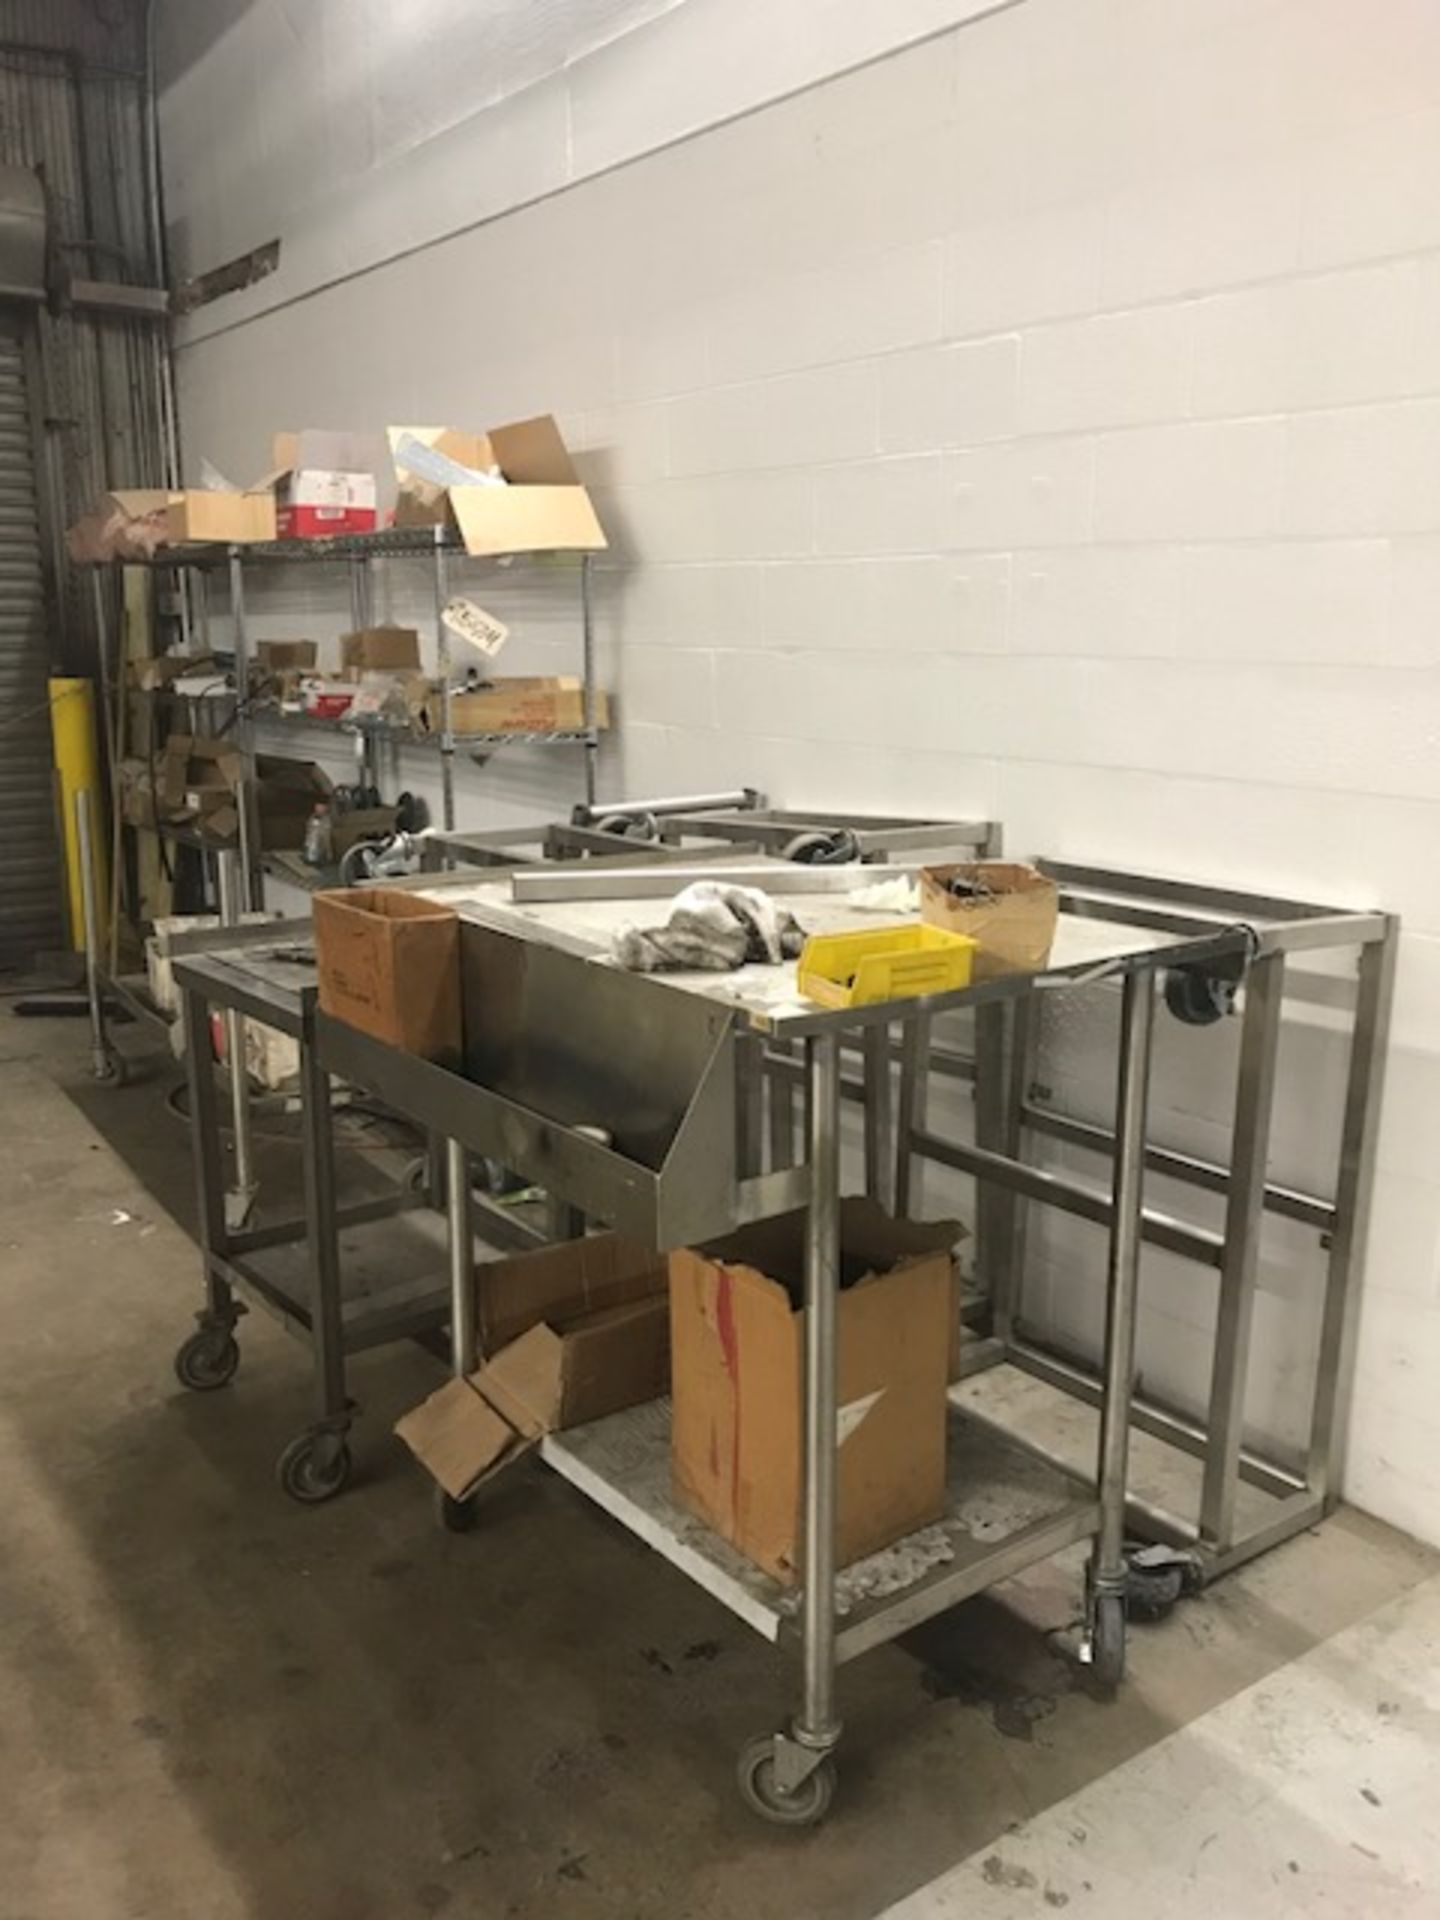 (2) Bakers Racks & Portable Stainless Steel Carts